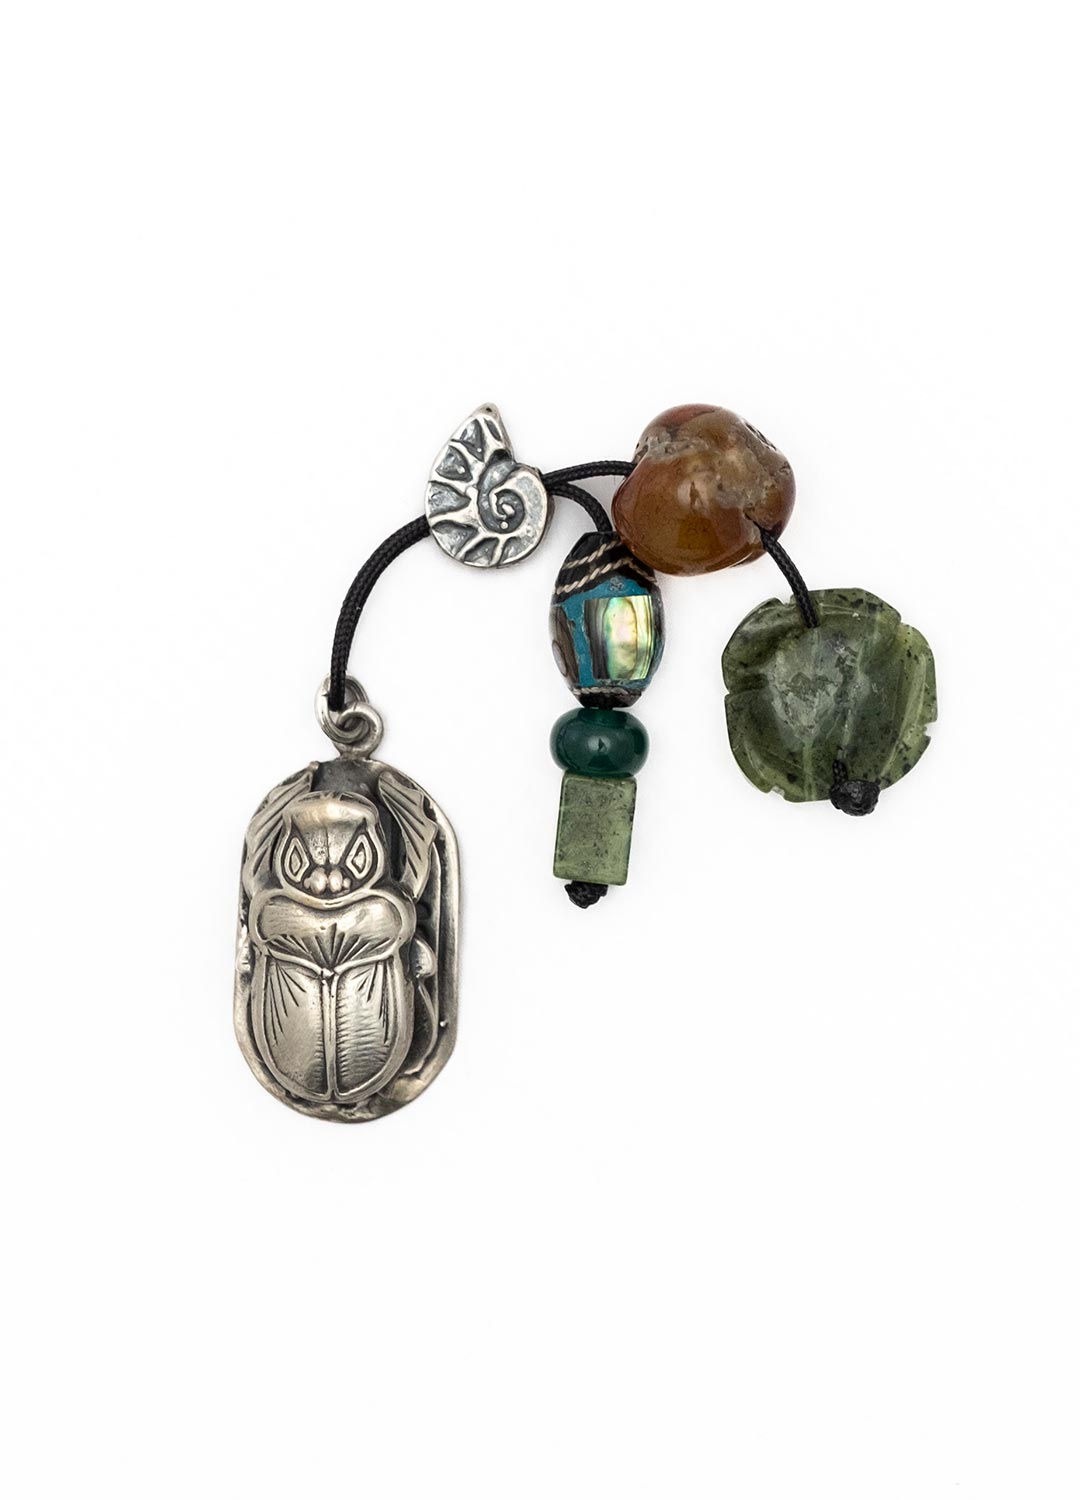 Scarab - Ank Cross : For health. Amulet with semi precious stones: Mother of pearl,jasper,mineral turquoise,genuine amber from Baltic sea-cut by hand,lapis lazouli,green agate,tin.